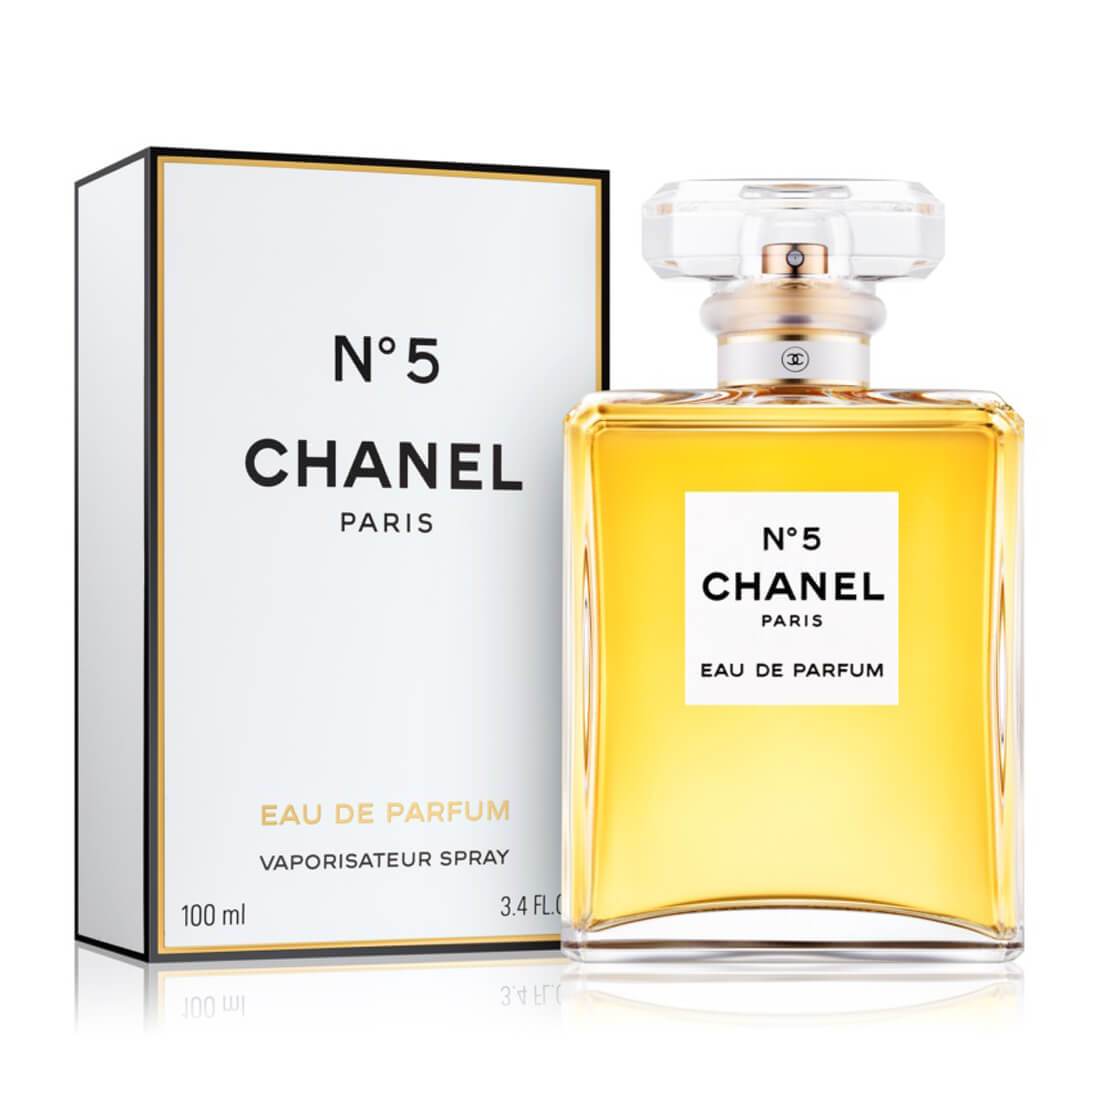 CHANEL NO.5 EDP PERFUME FOR HER - V Gift Shop